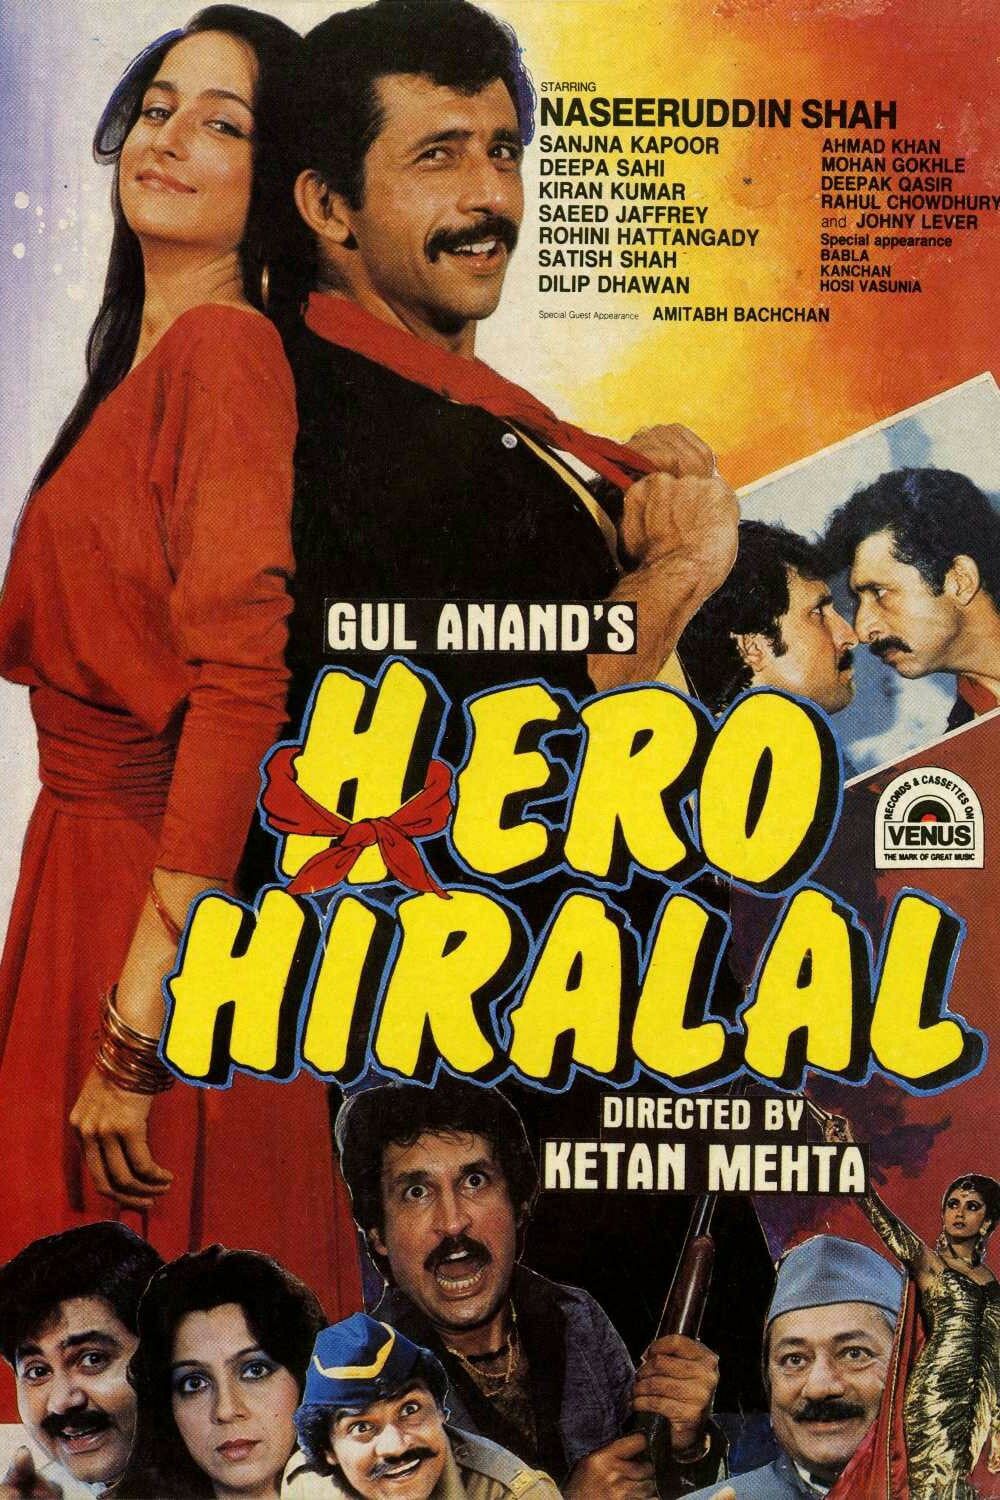 Poster for the movie "Hero Hiralal"